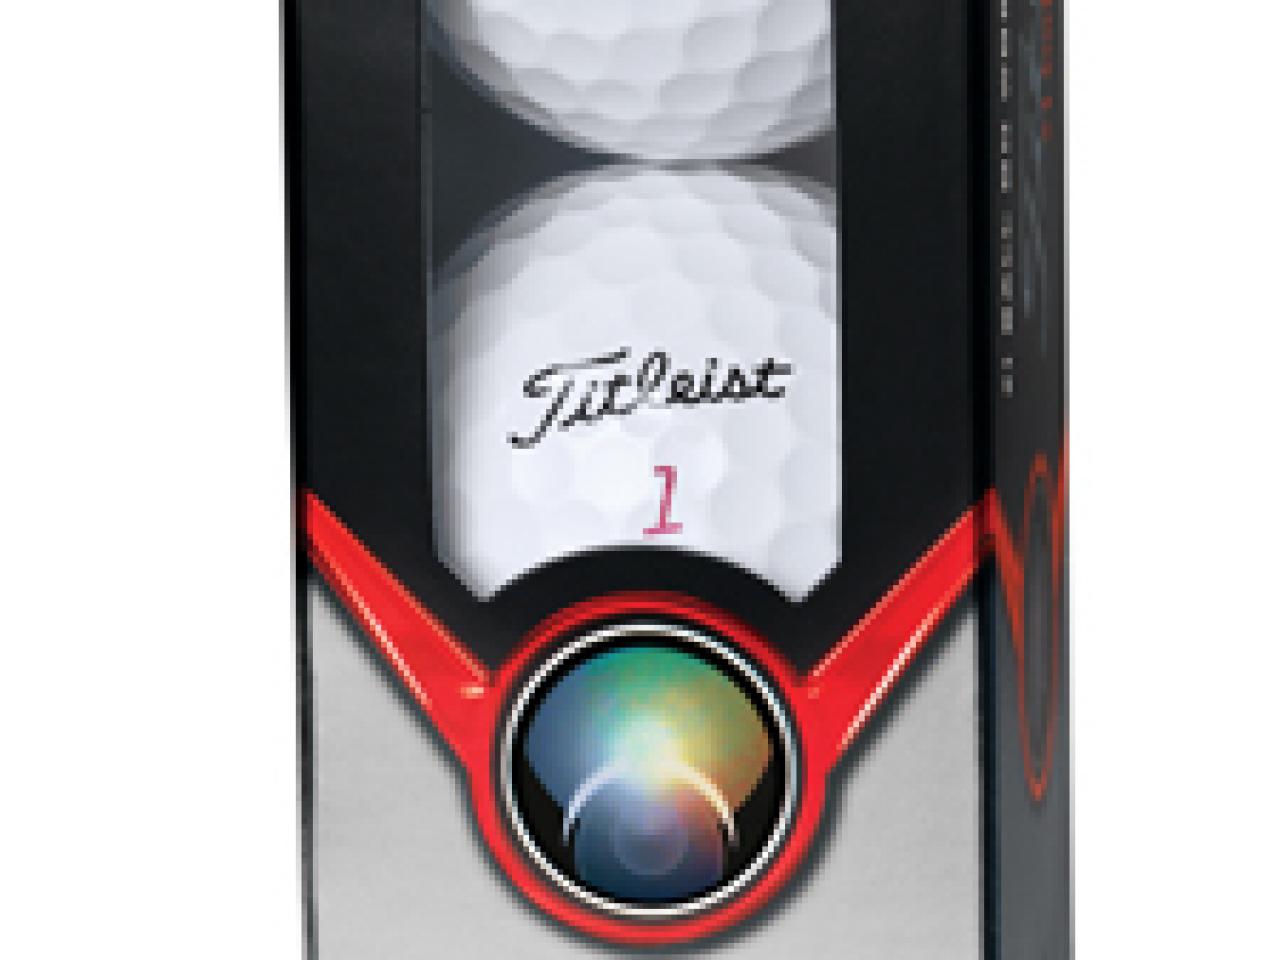 New Pro V1/Pro V1x launched with consistency, performance This is the